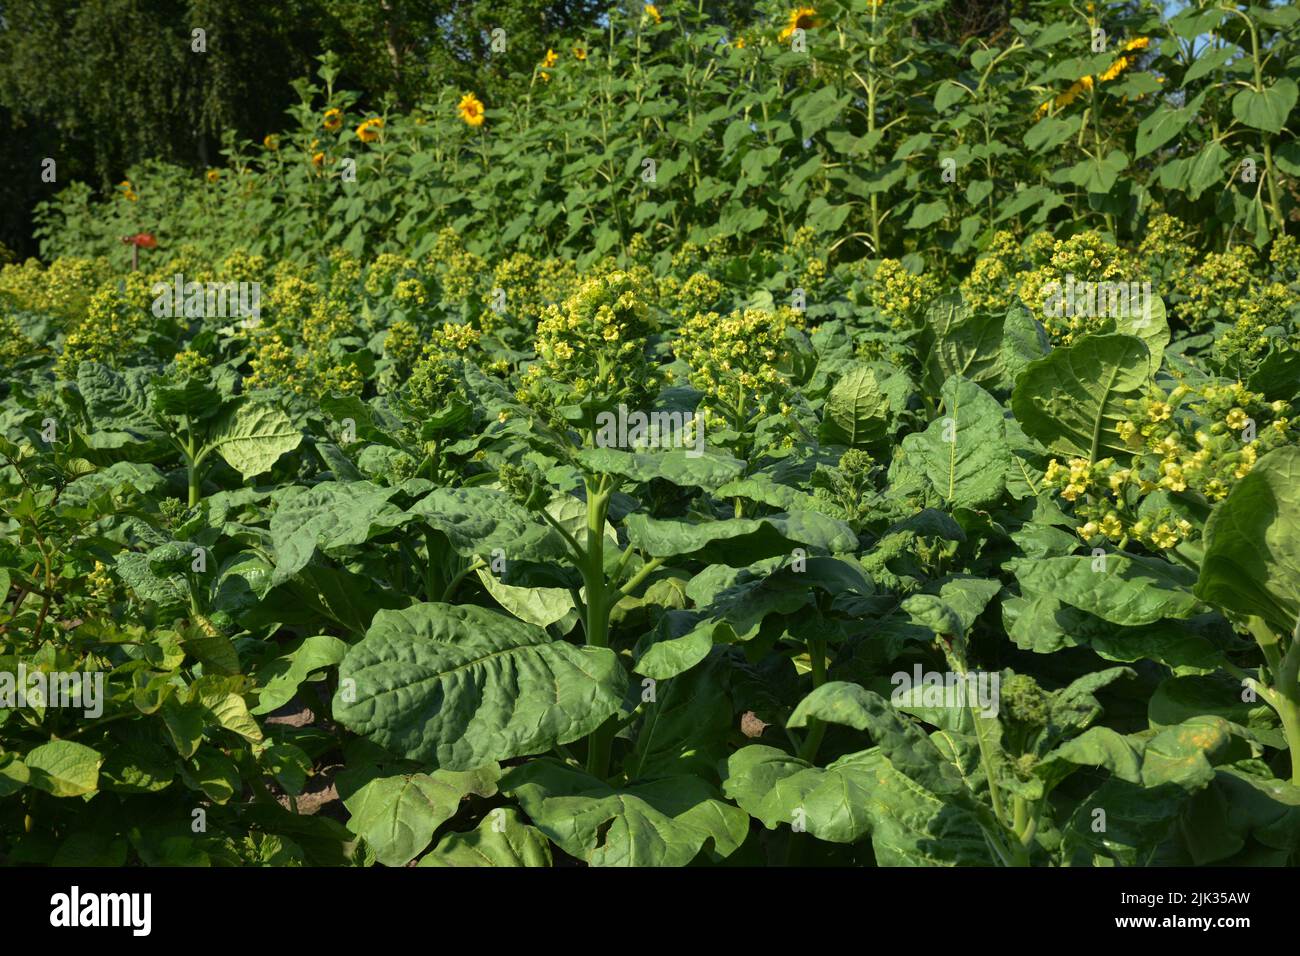 Growing Nicotiana rustica, Aztec tobacco or strong tobacco. Blooming Nicotiana tabacum plant with yellow flowers needs deadheading to encourage better Stock Photo